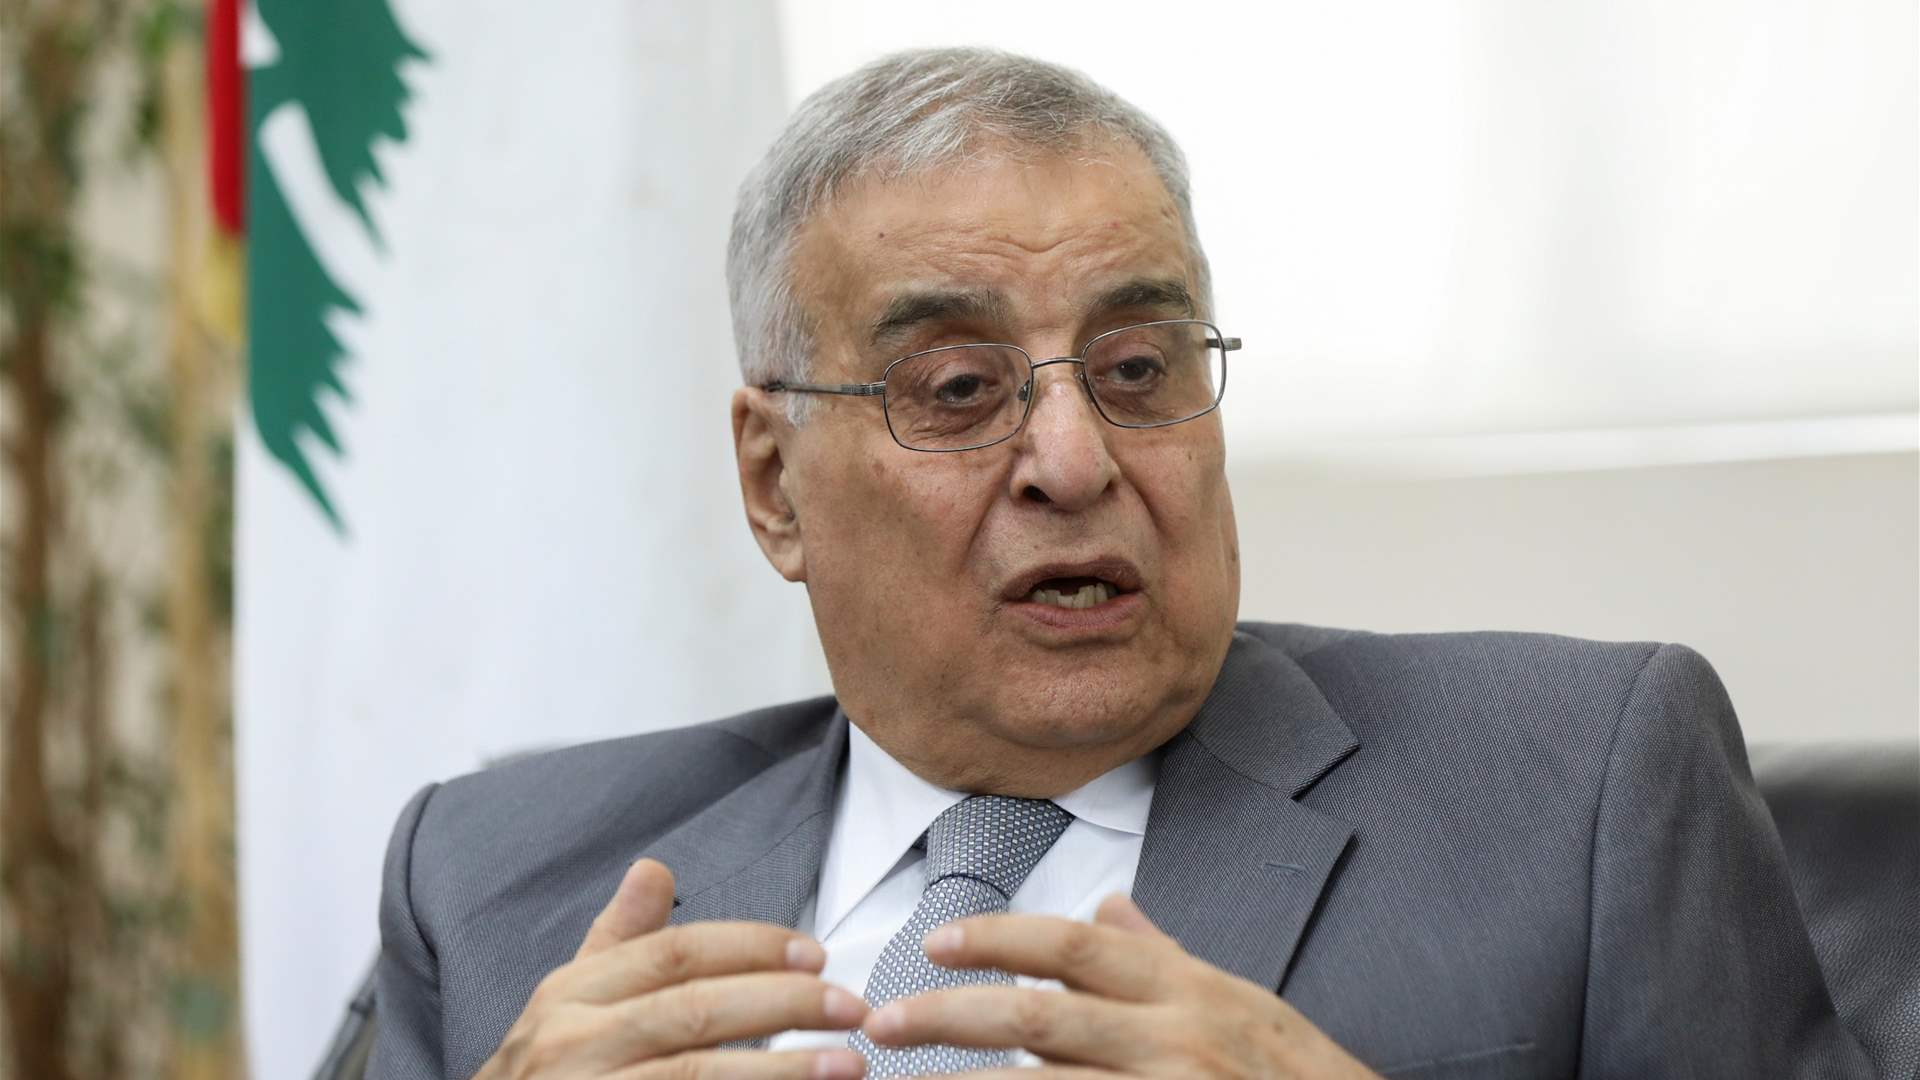  Lebanon’s FM Bou Habib: Resolution 1701 remains the only way to prevent further violence